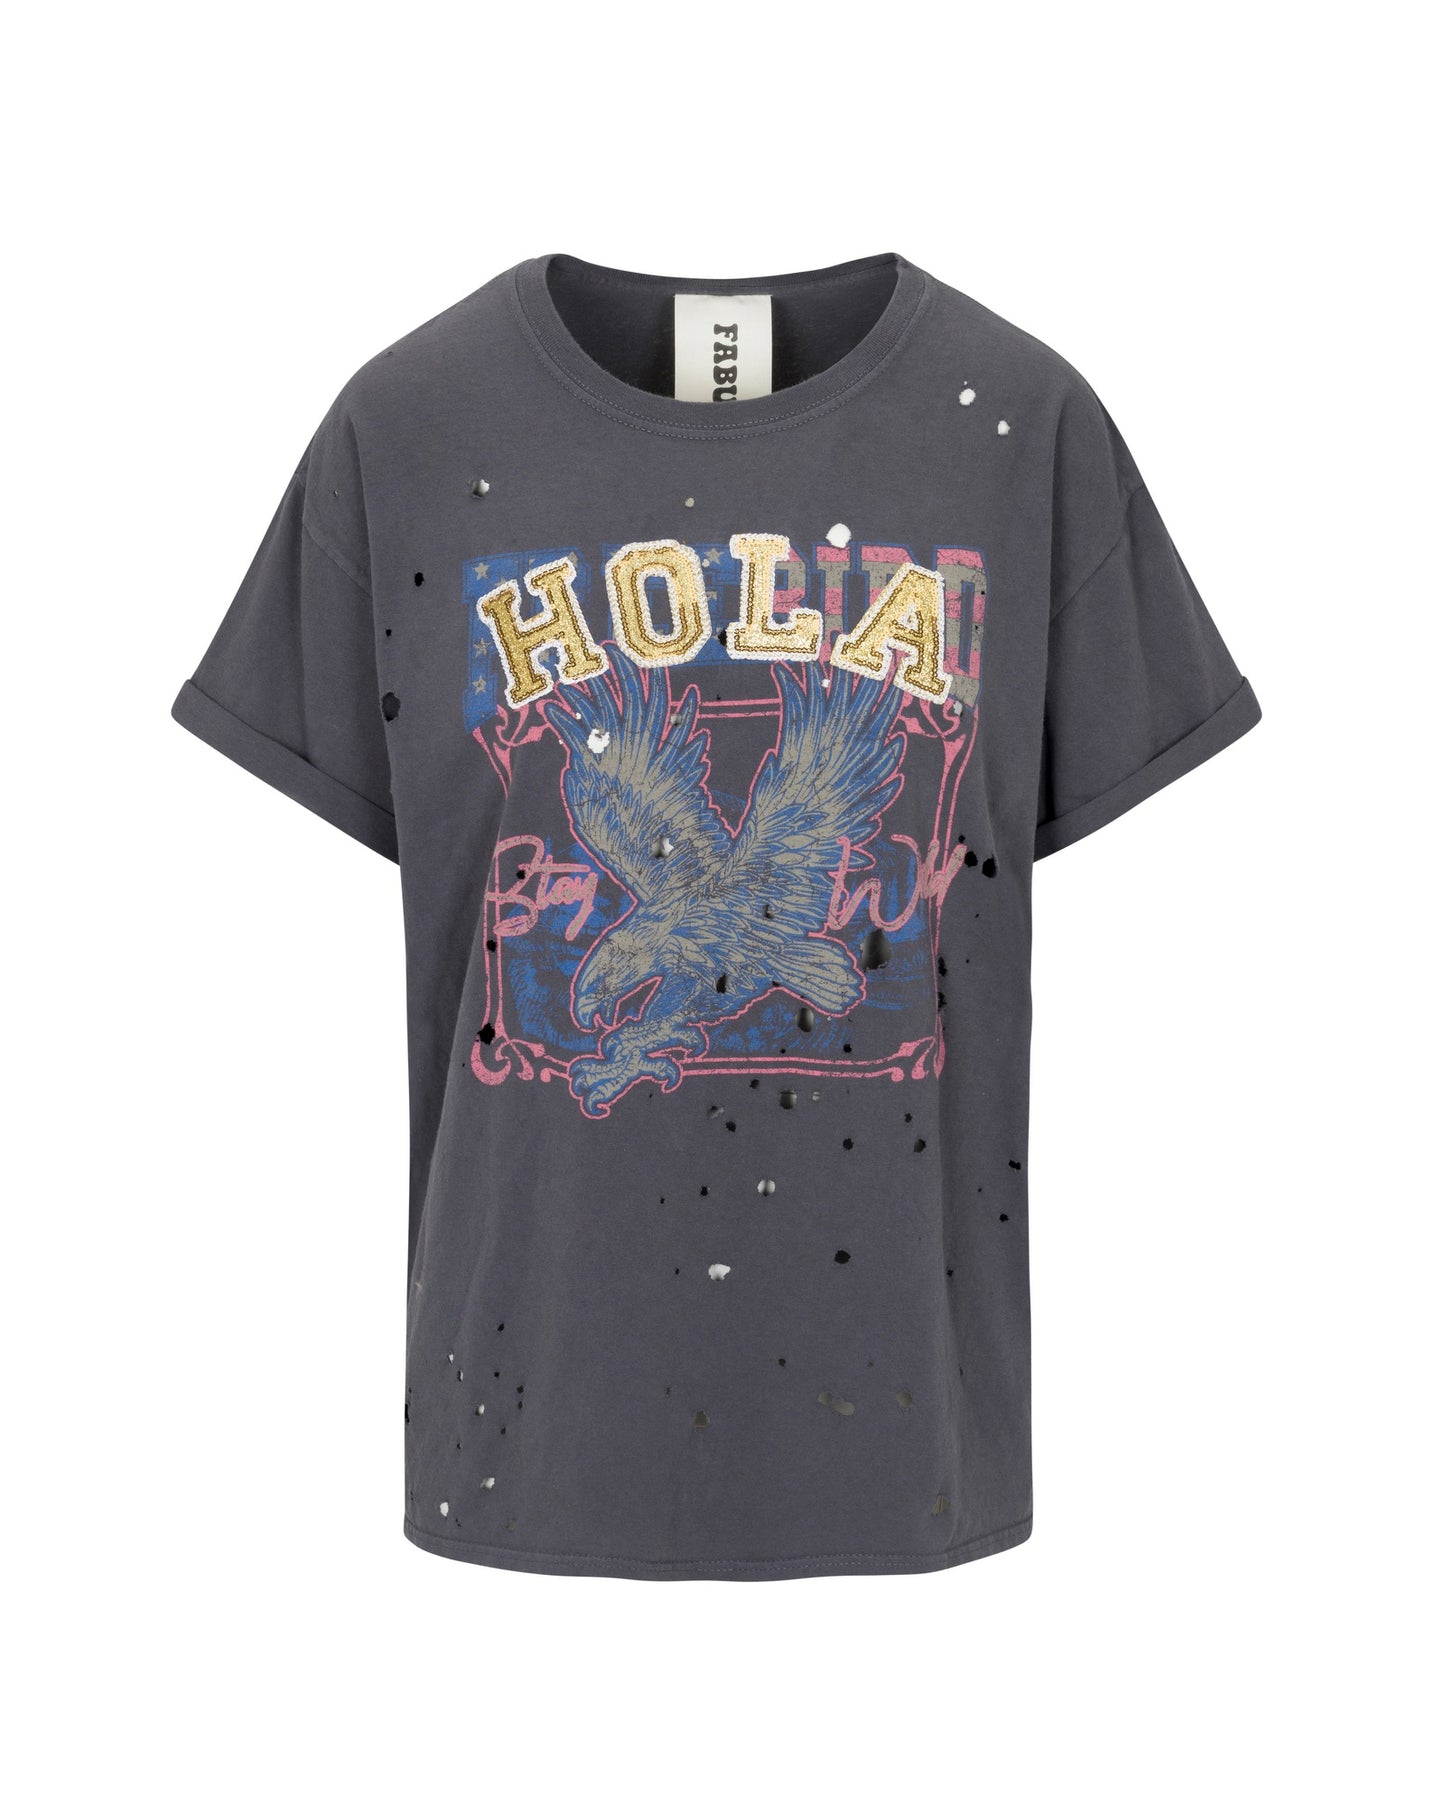 Hola Chica Vintage T-Shirt